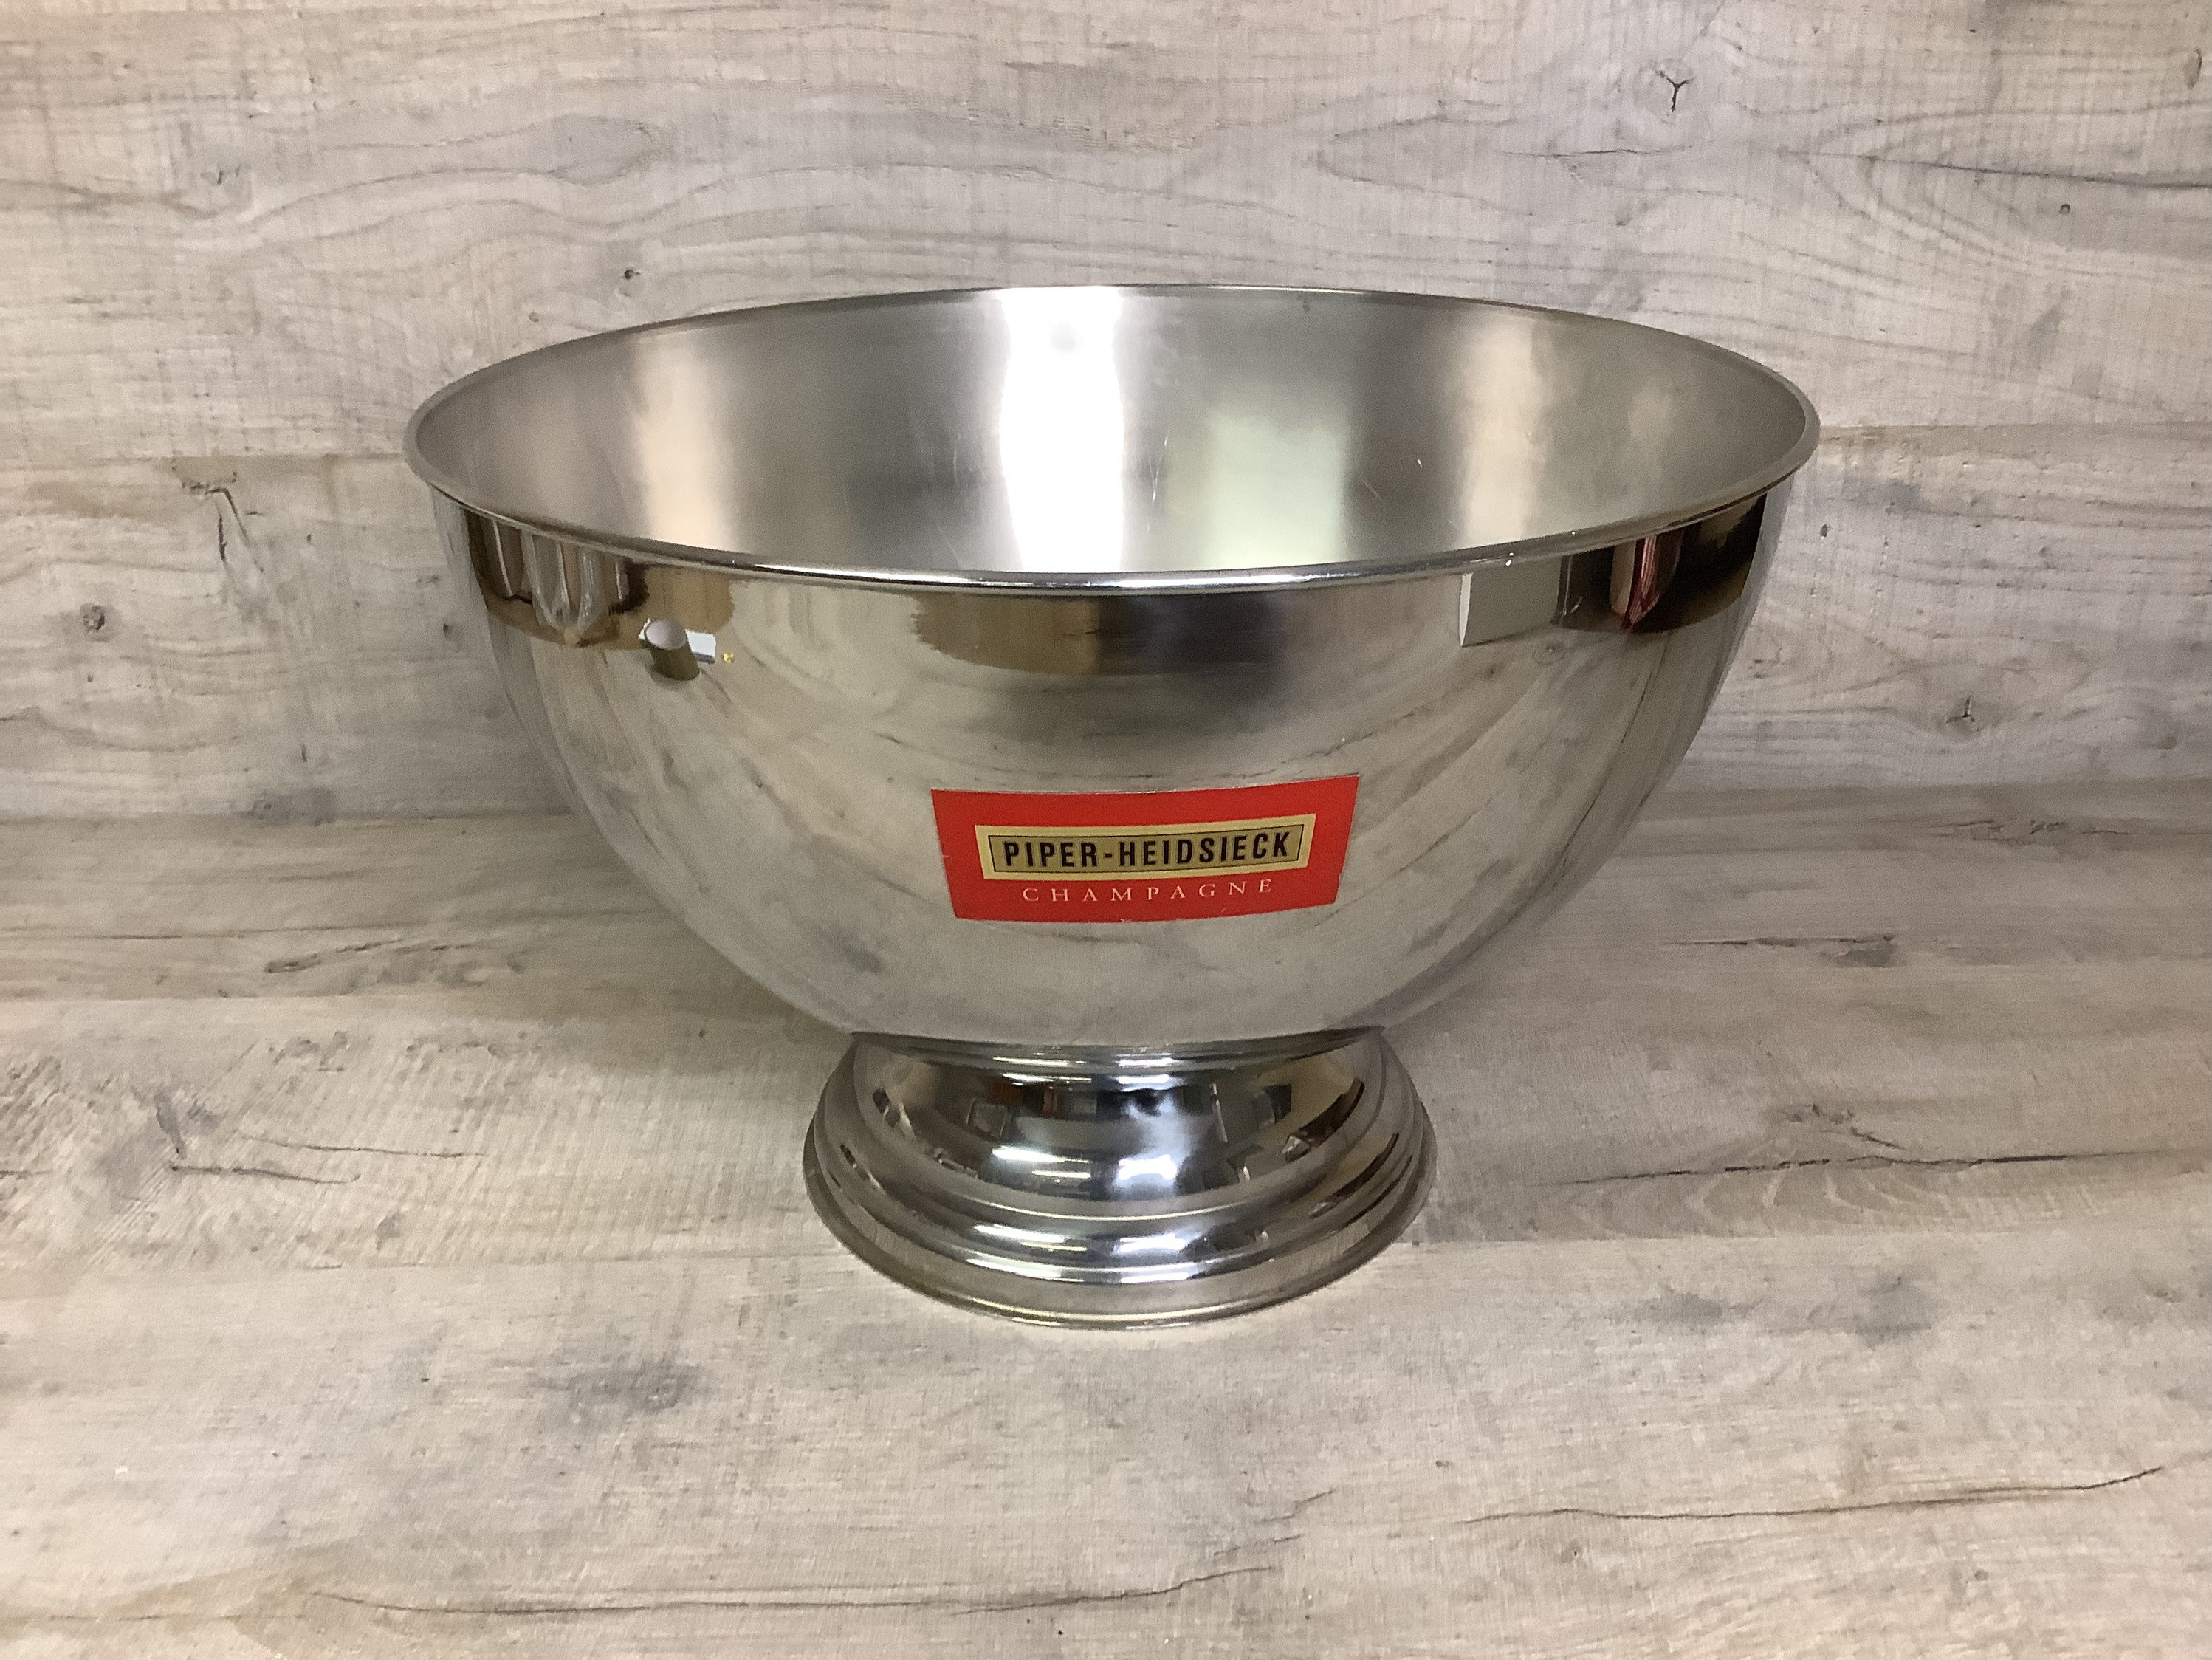 Seau à Champagne Piper/Champagne Ice Bucket From Cooler Vintage Made in France